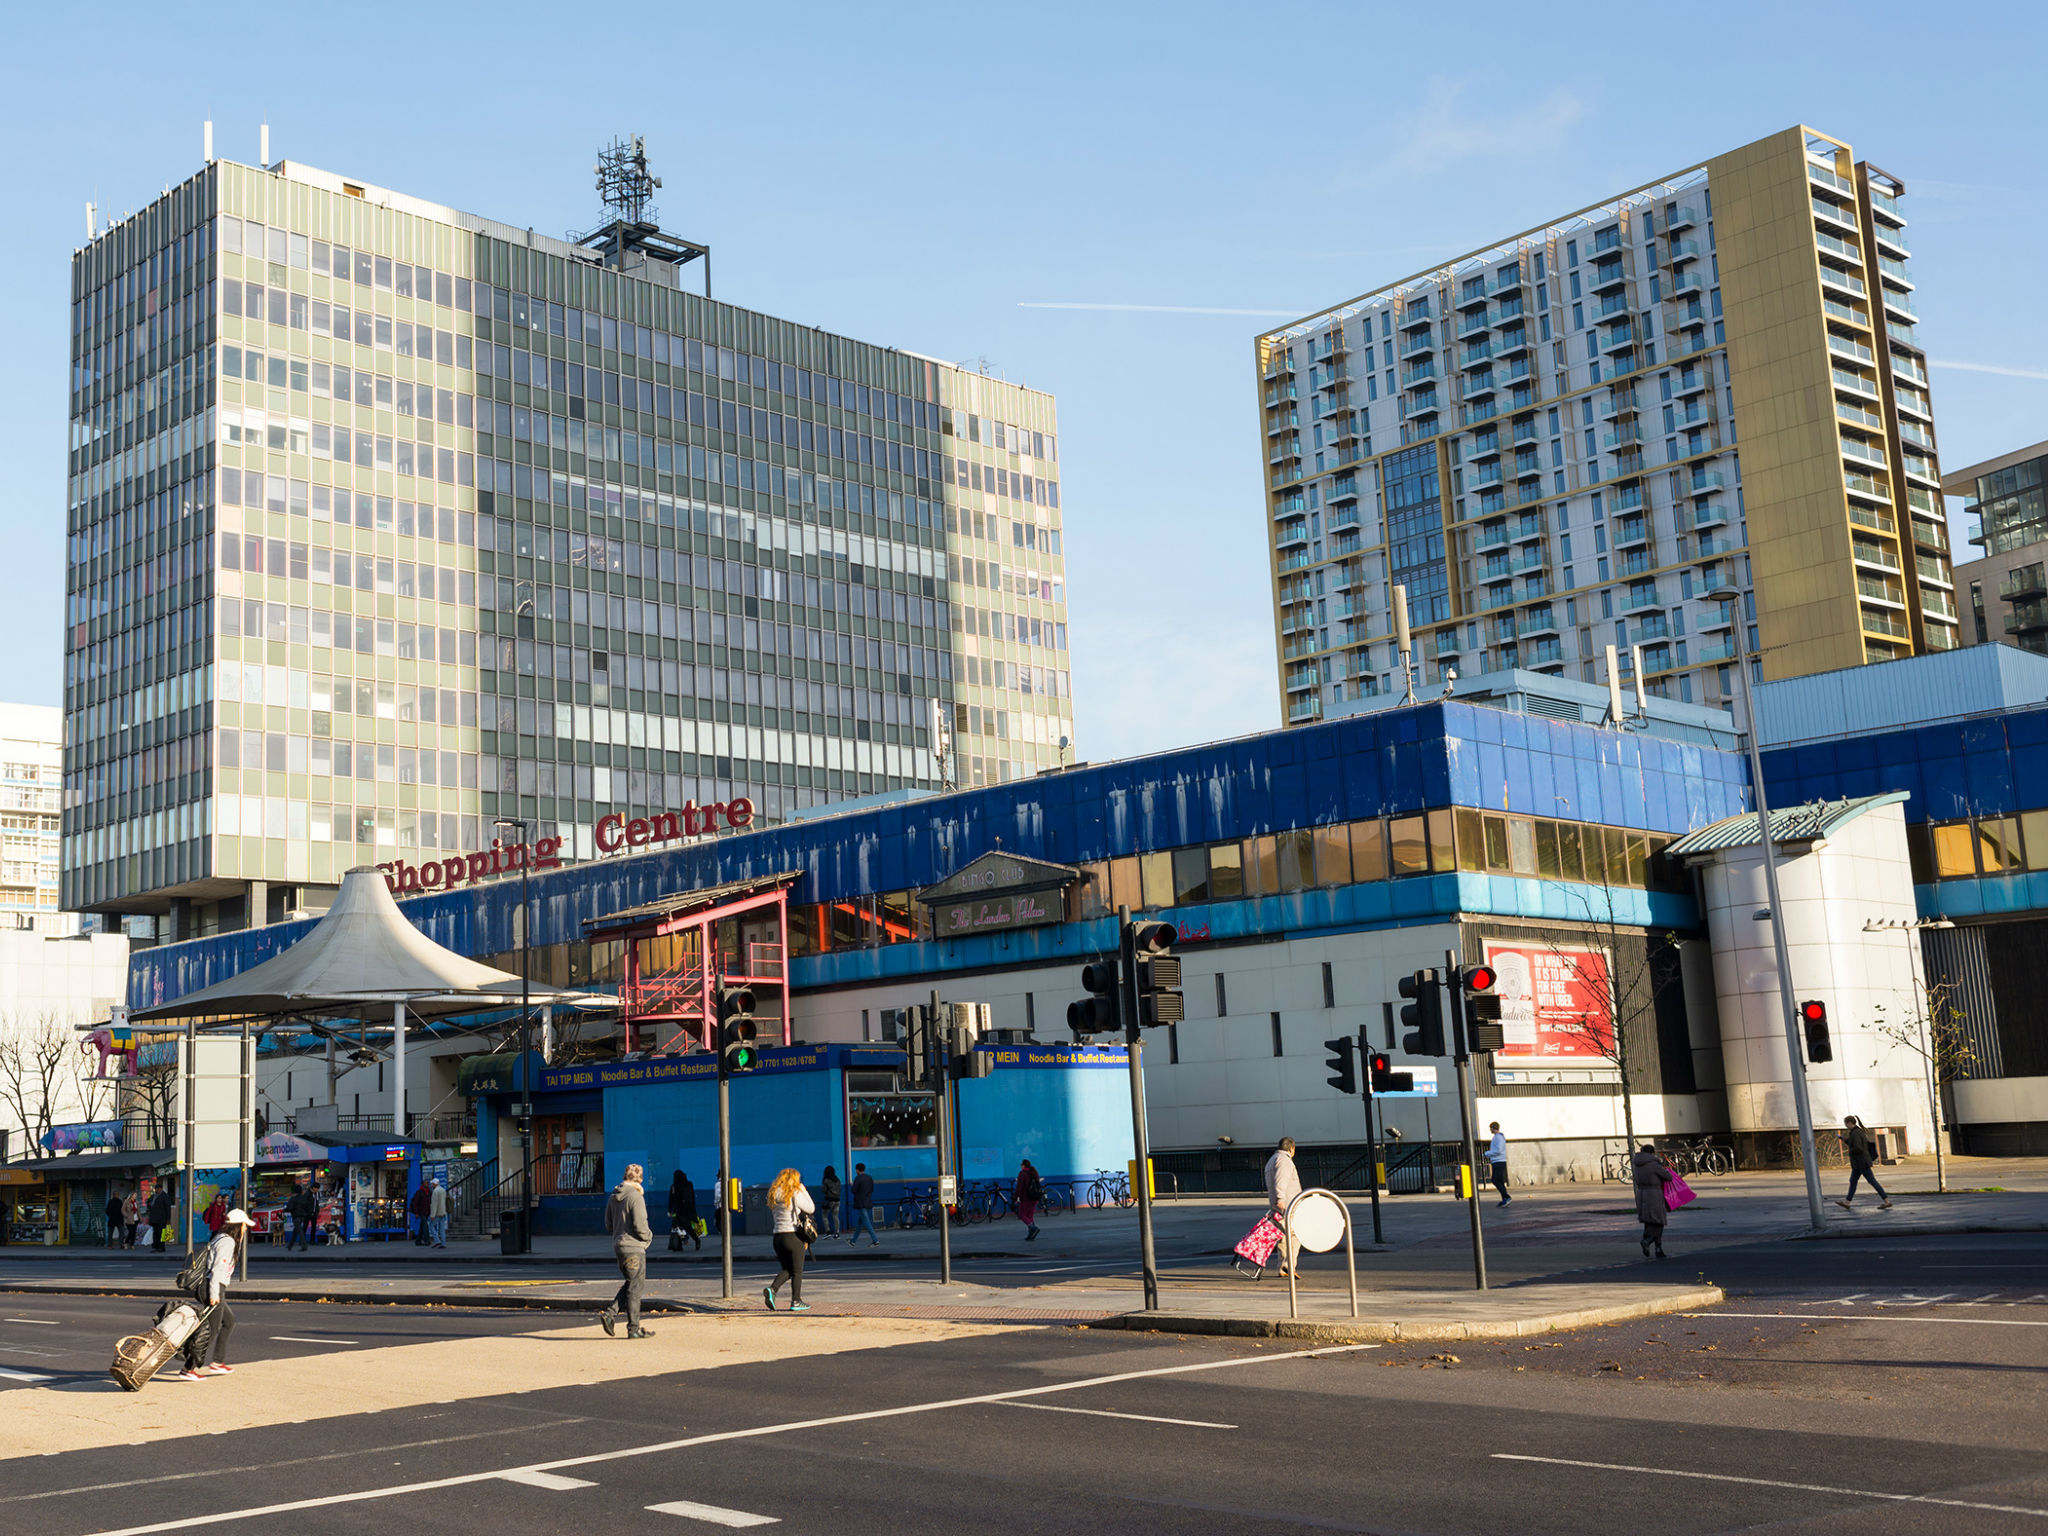 Elephant & Castle Shopping Centre: Londoners gather to 'make some noise